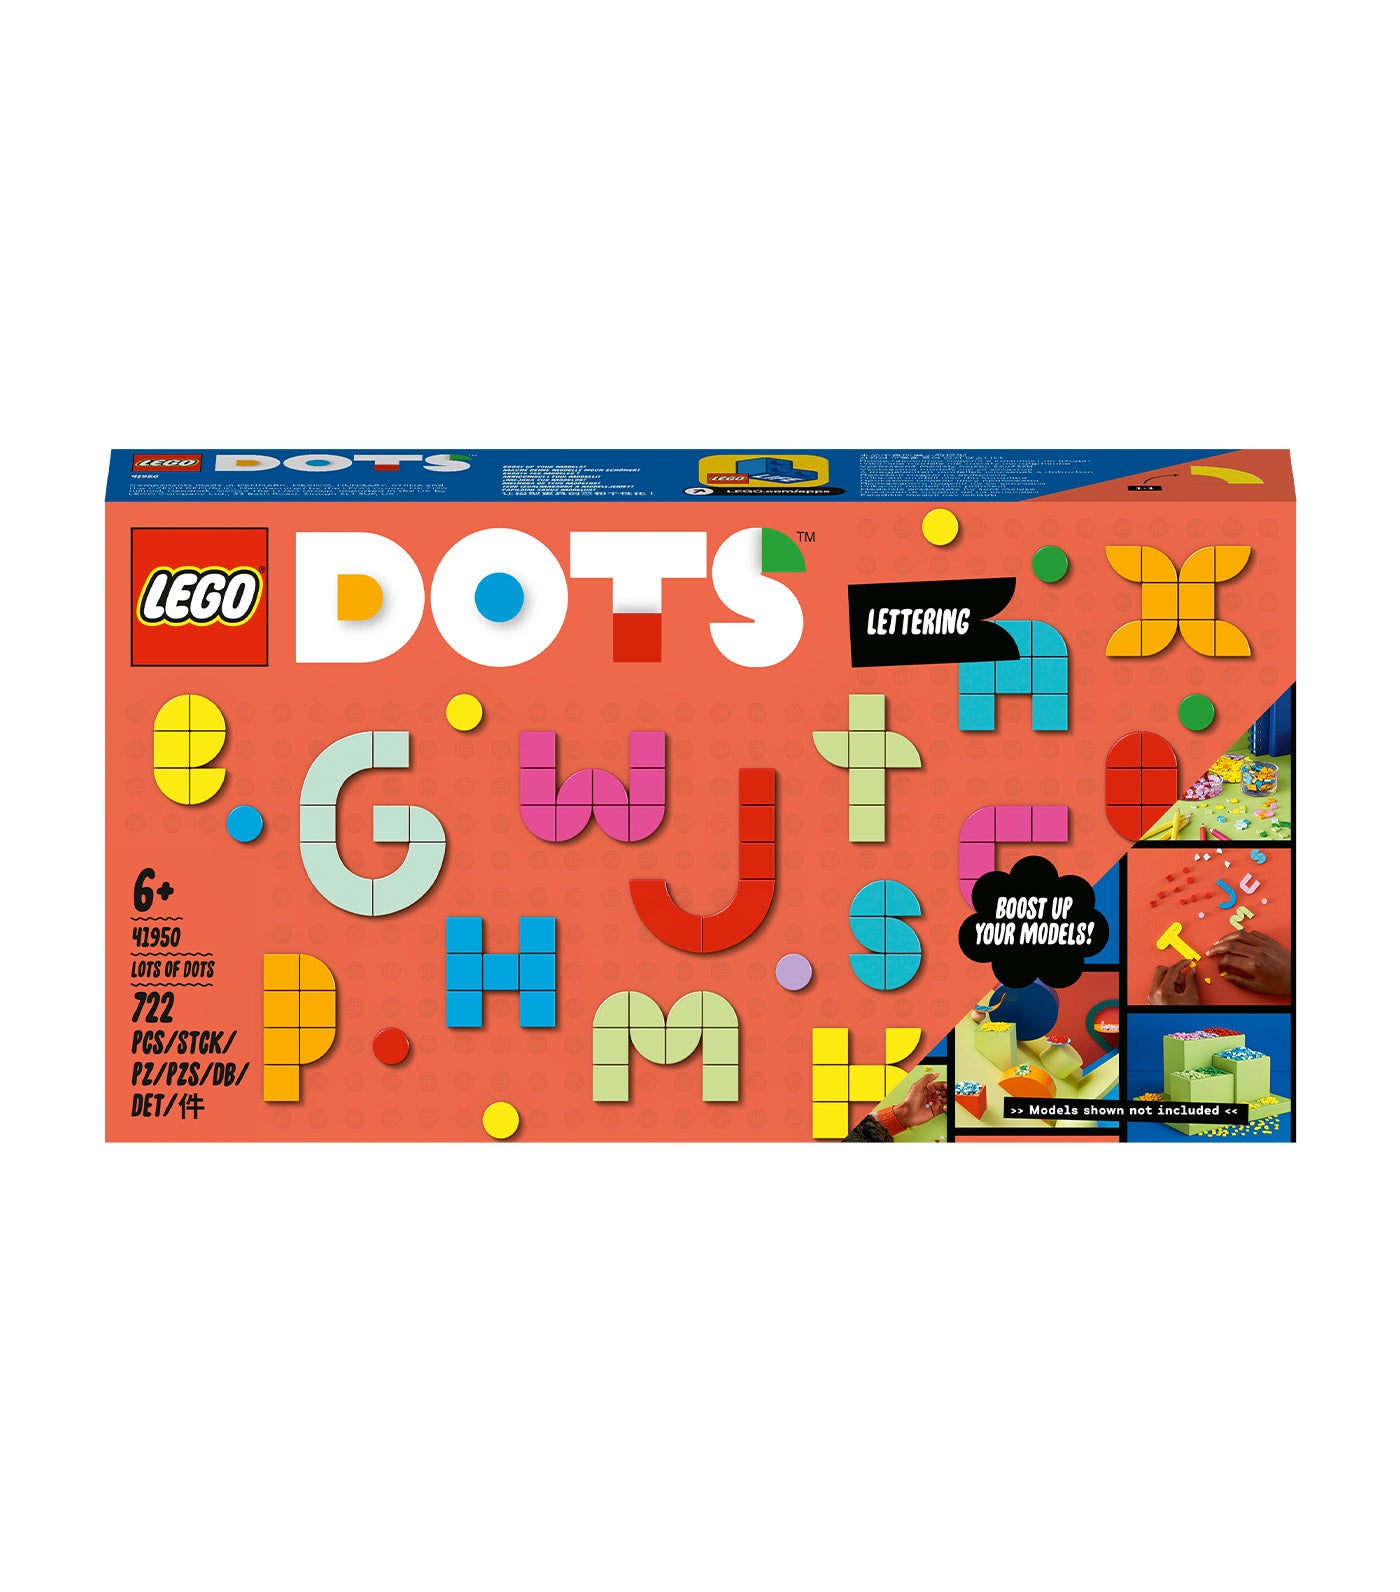 LEGO® DOTS Lots of DOTS – Lettering